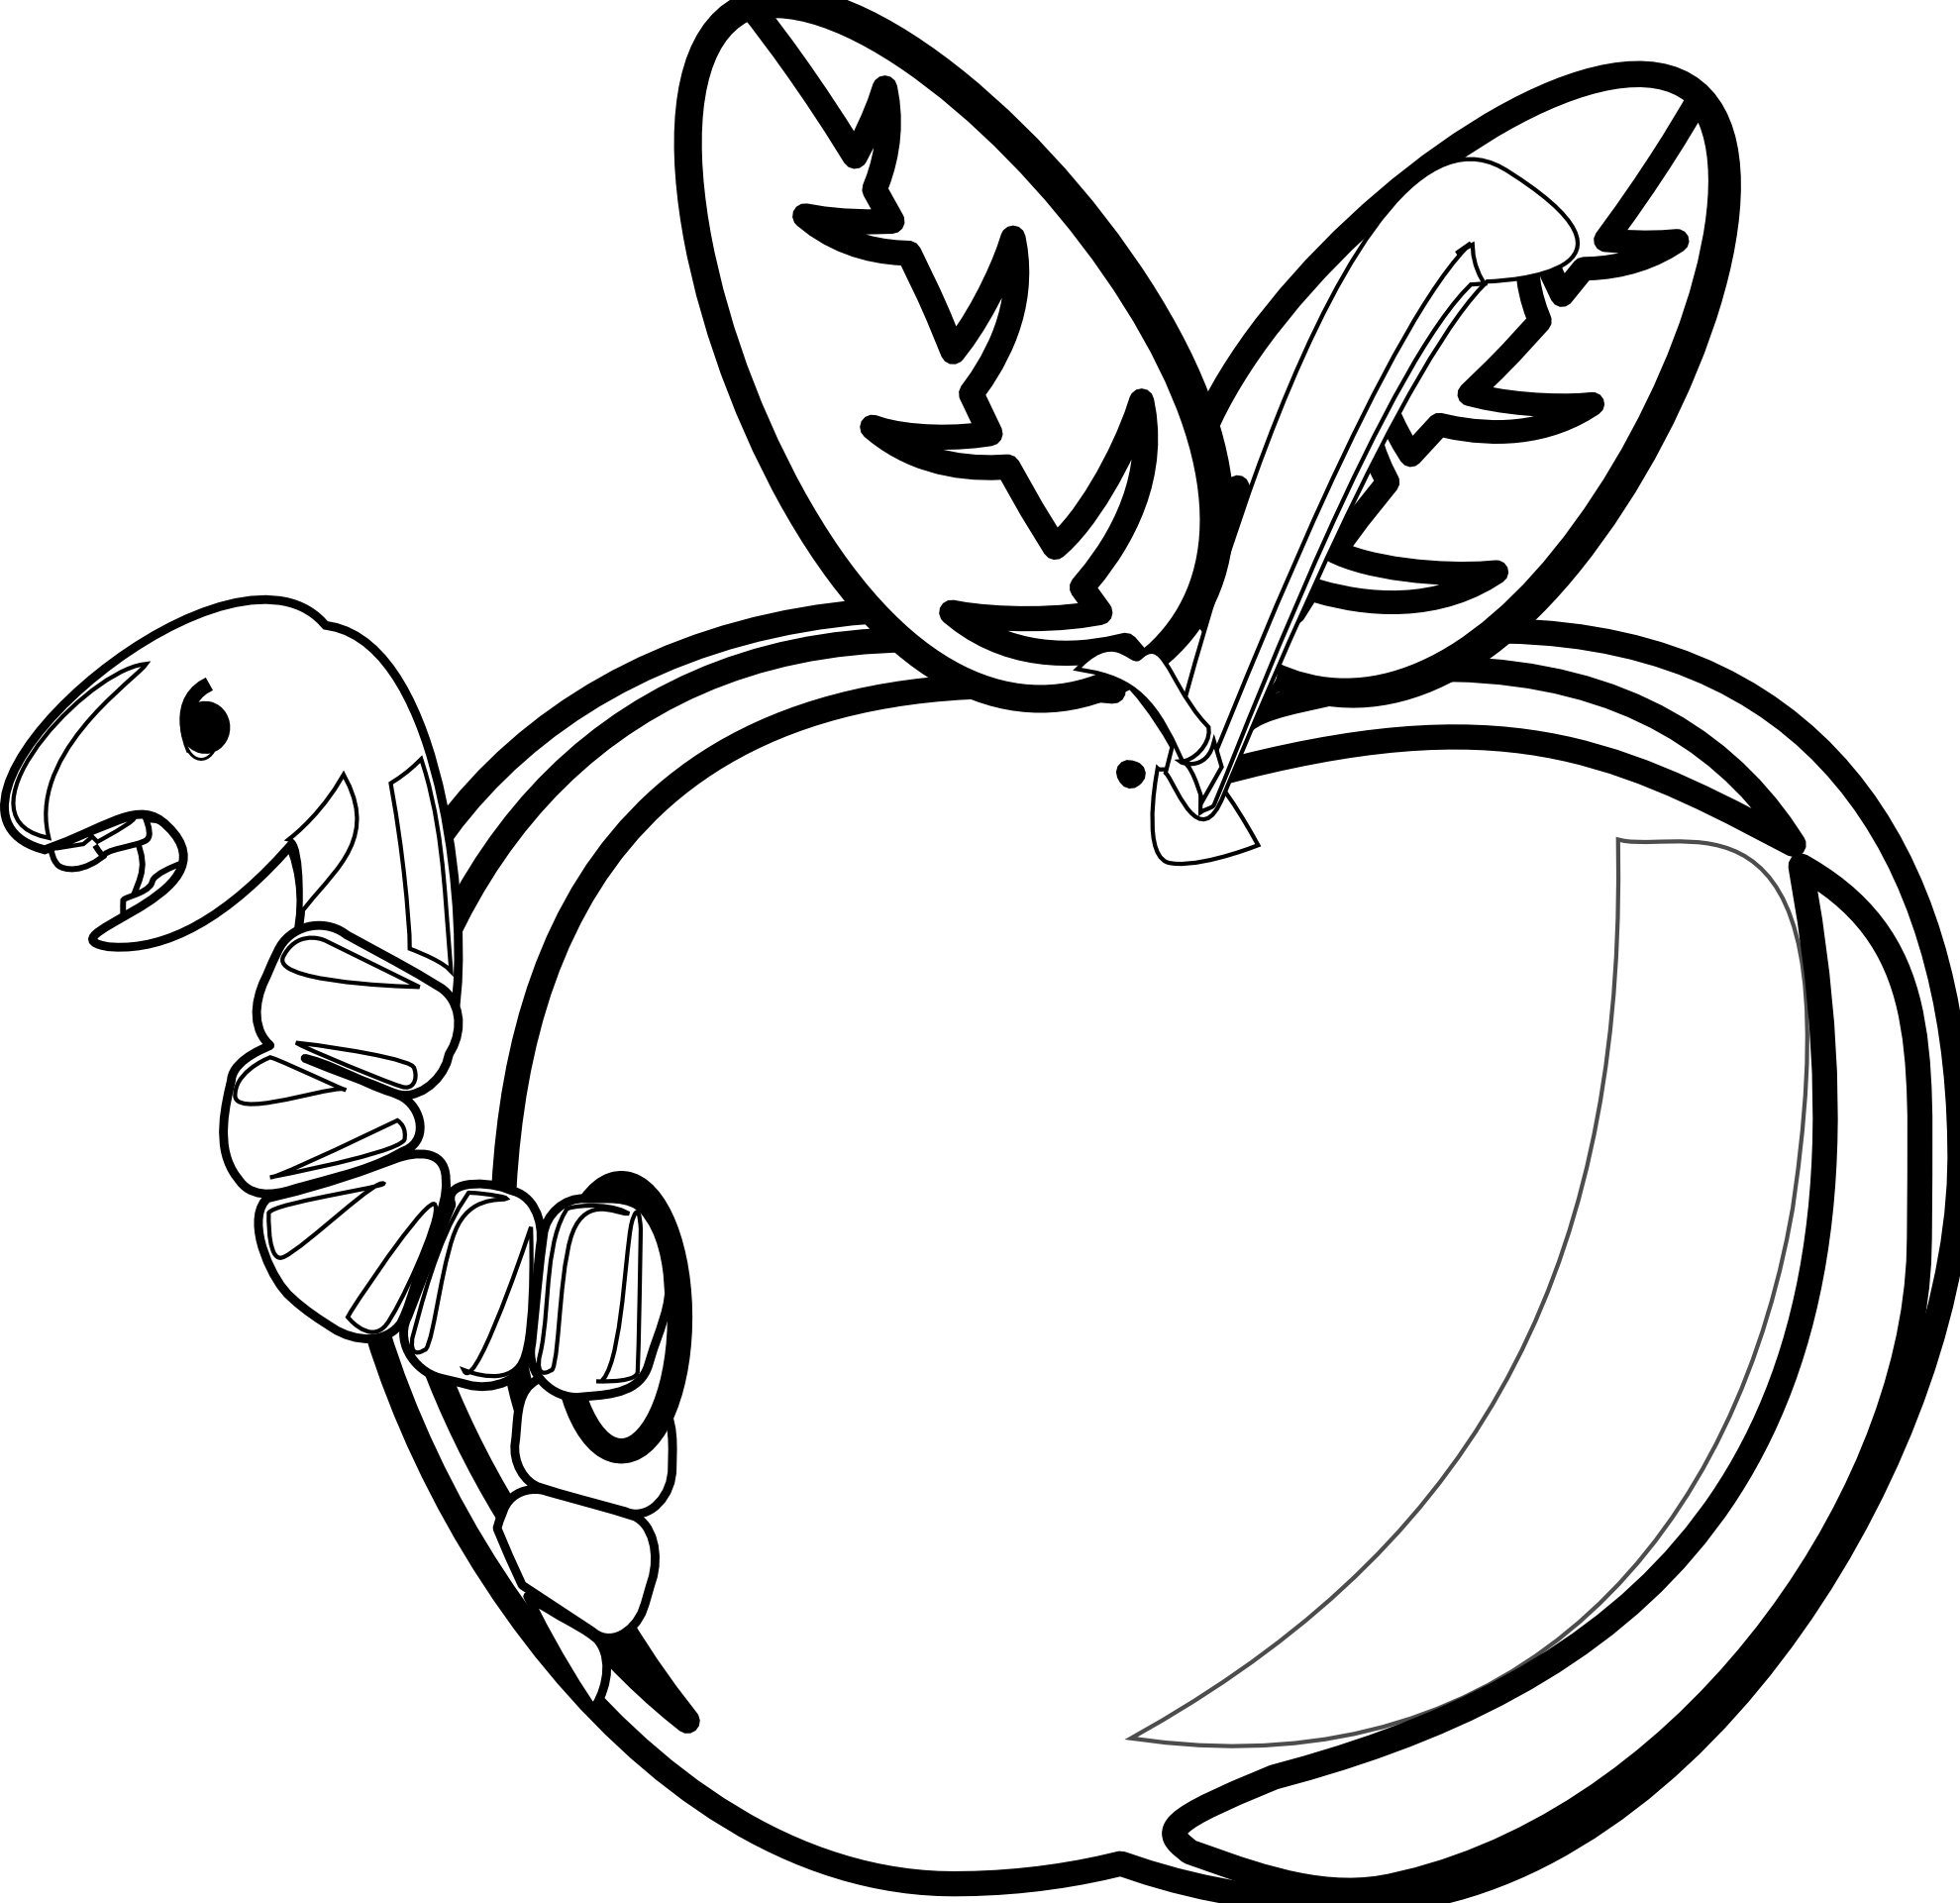 Download Apple Black And White Rg 1 Cartoon Apple With Worm Black And White Rotten Apple Png Image With No Background Pngkey Com